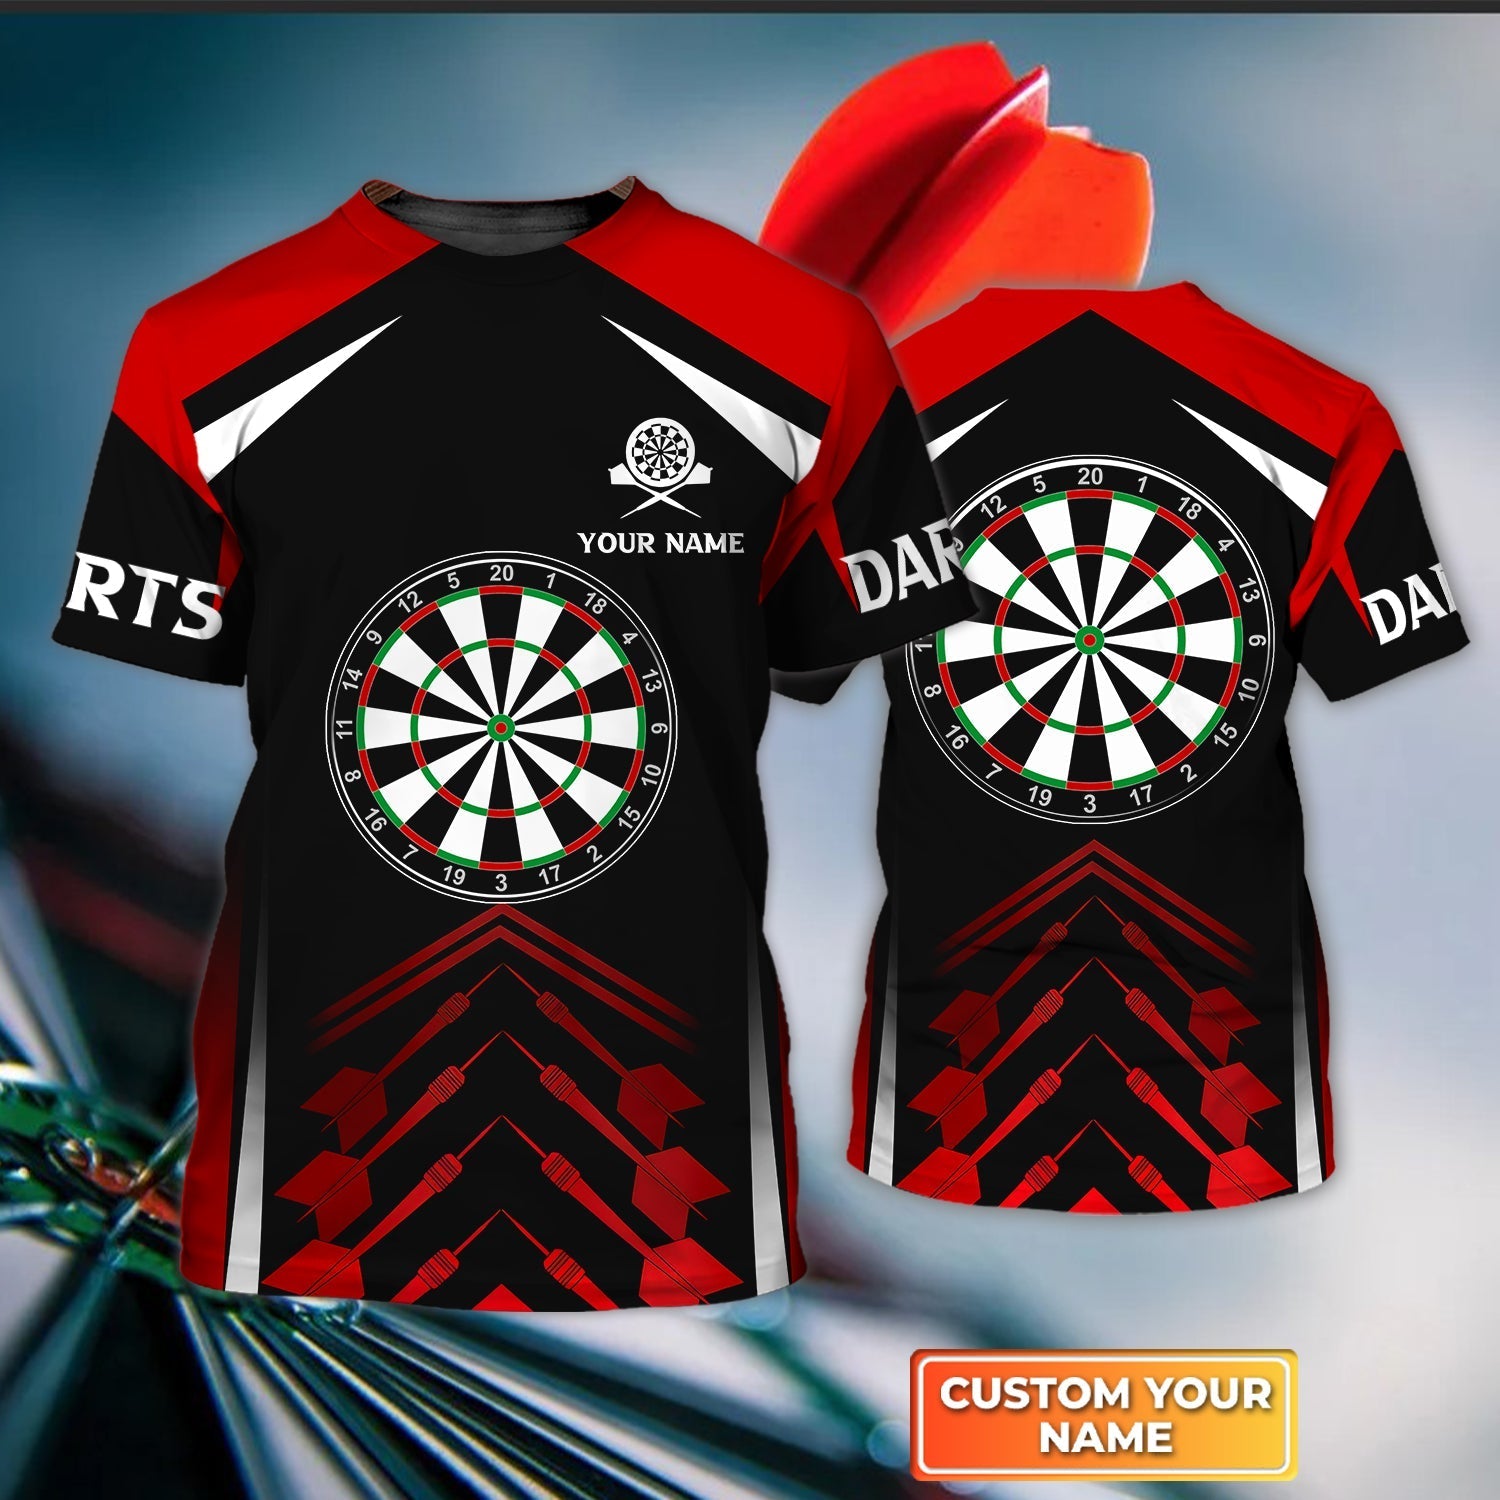 Darts Flame Thunder Lightning Personalized Name 3D Tshirt For Darts Player – DT160